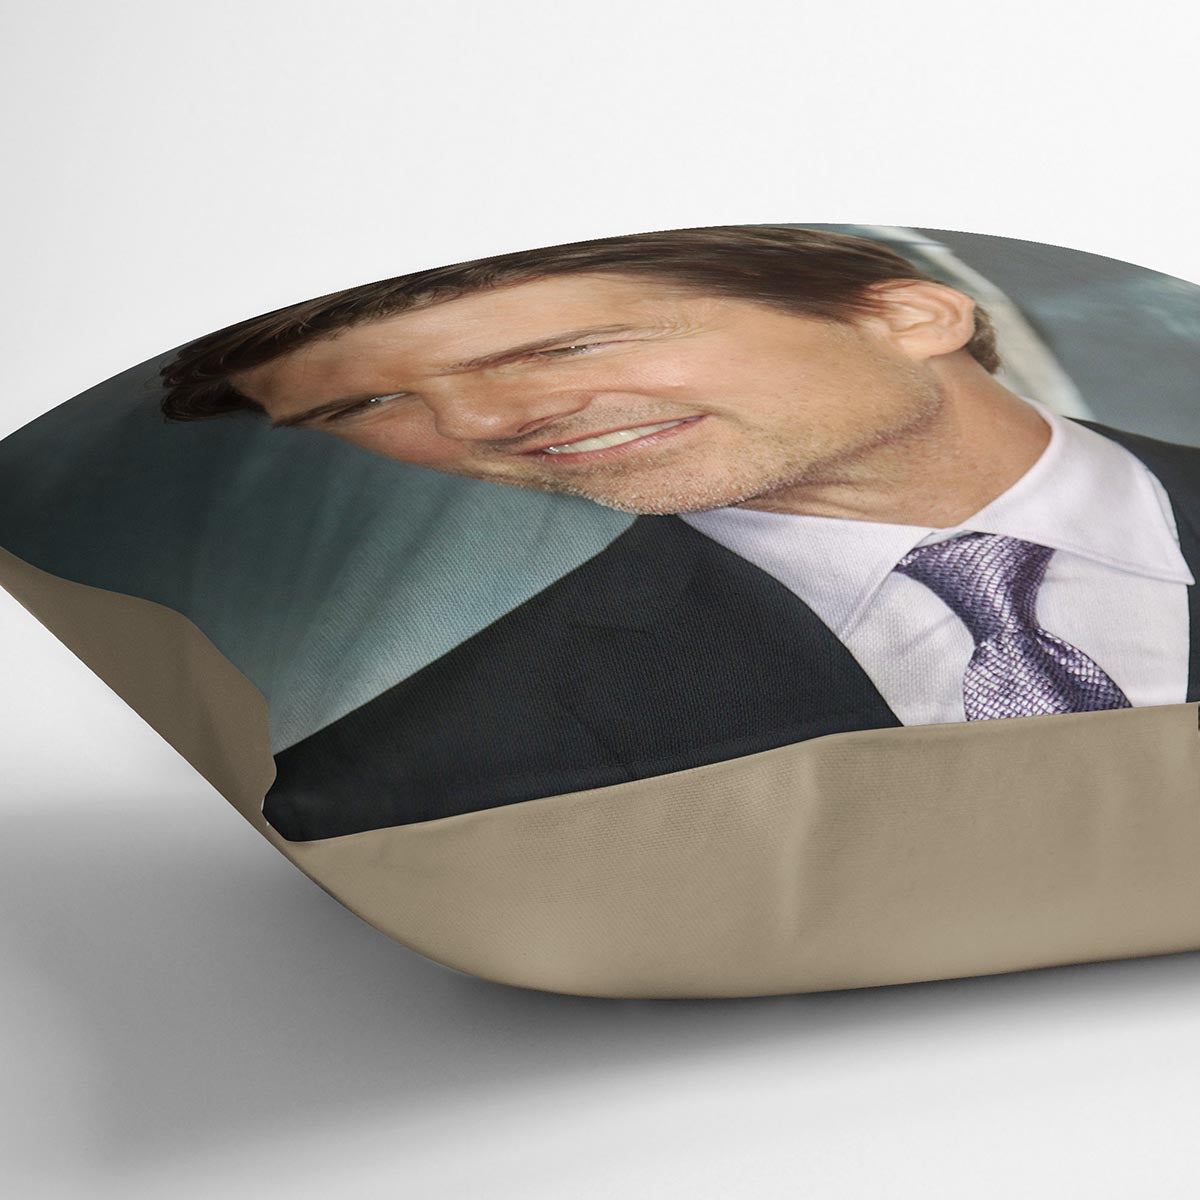 Tom Cruise Mission Impossible Fallout Cushion